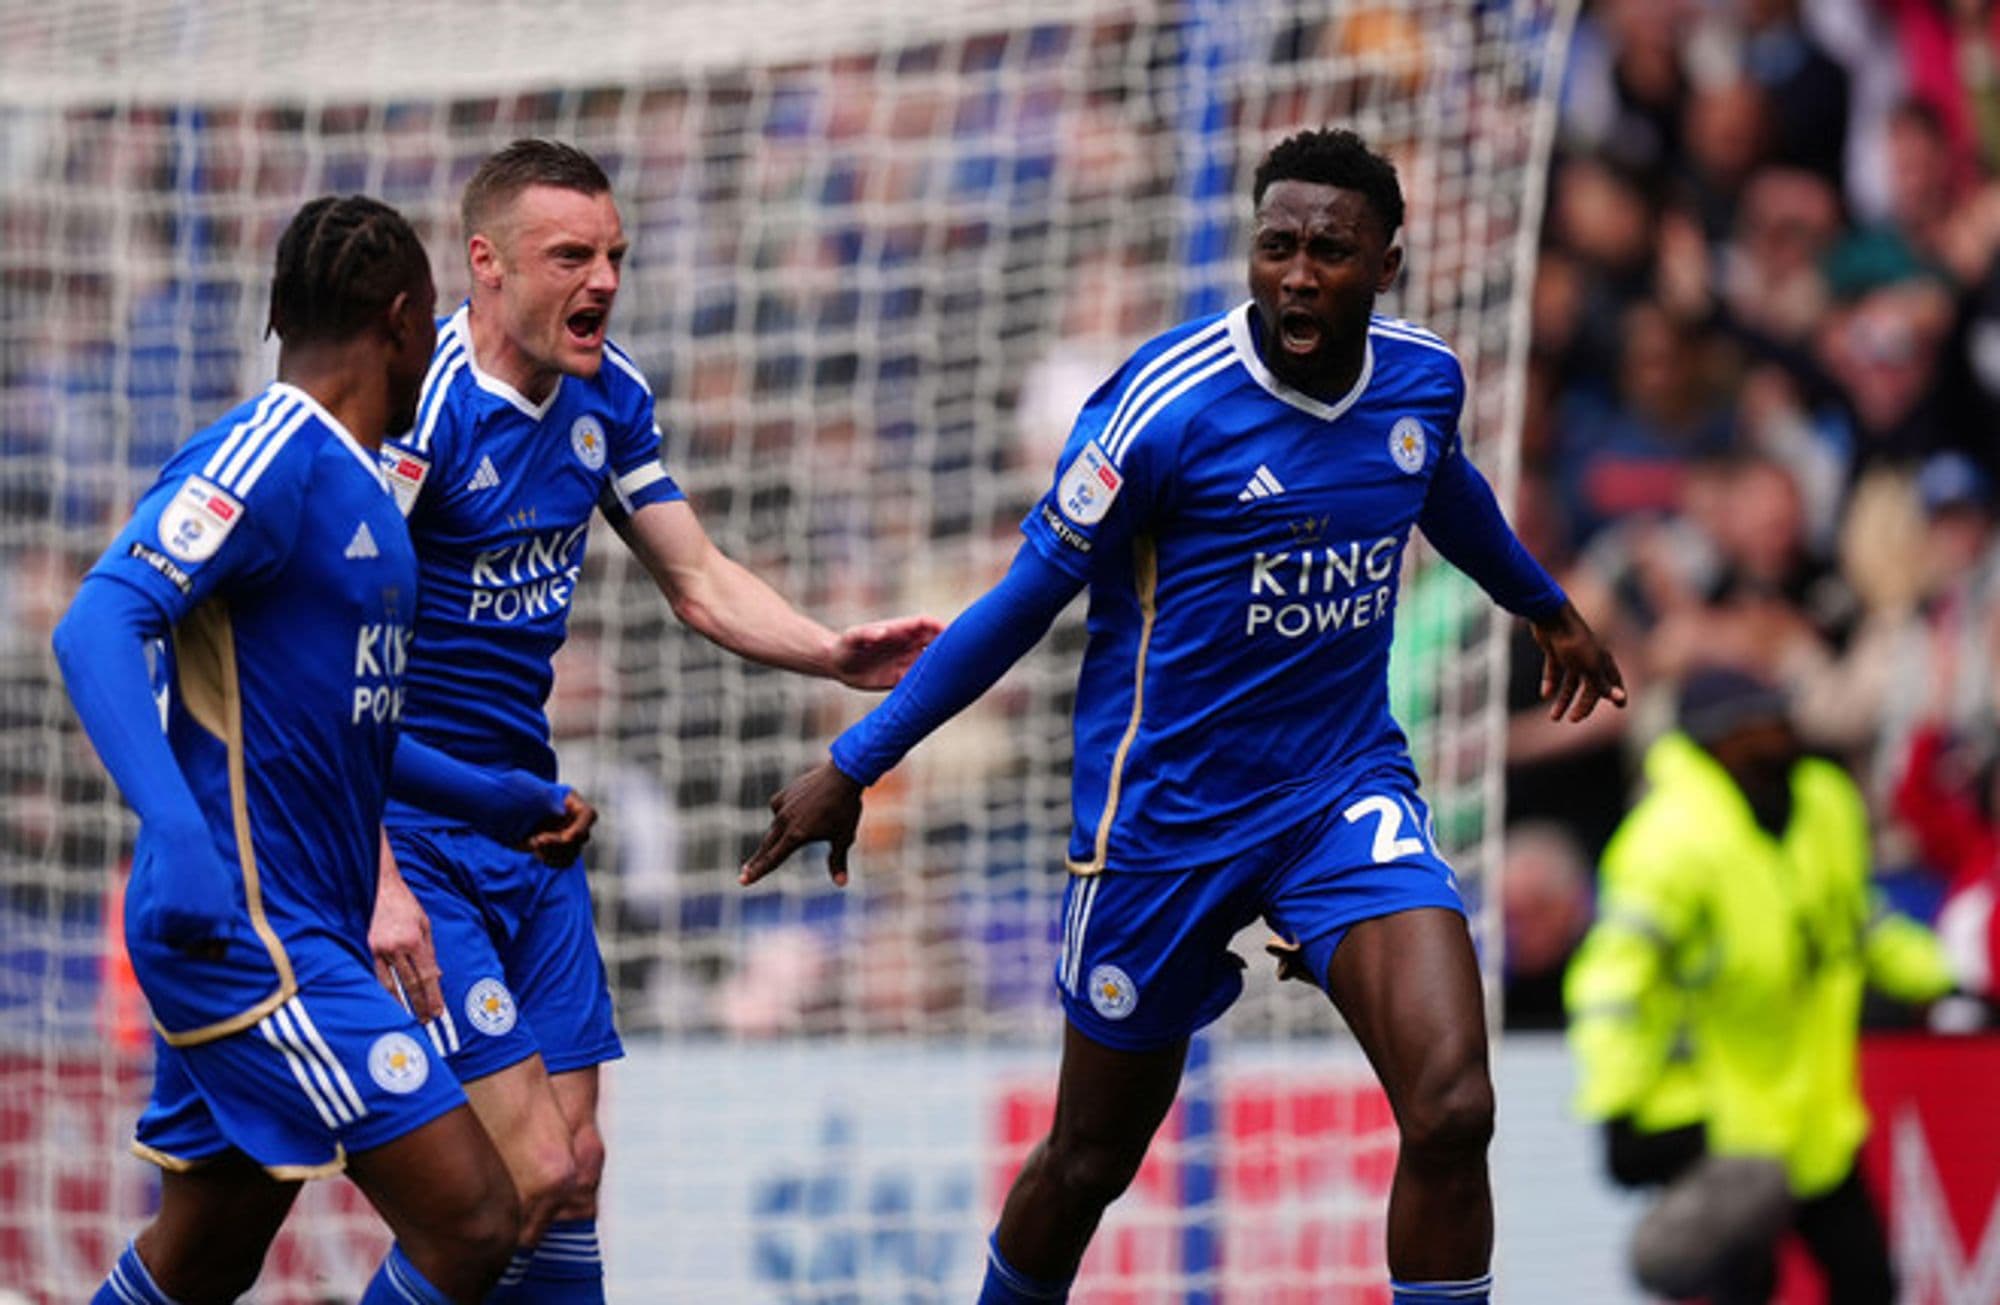 # Title: West Bromwich Albion Show Promise Despite Narrow Loss to Leicester City